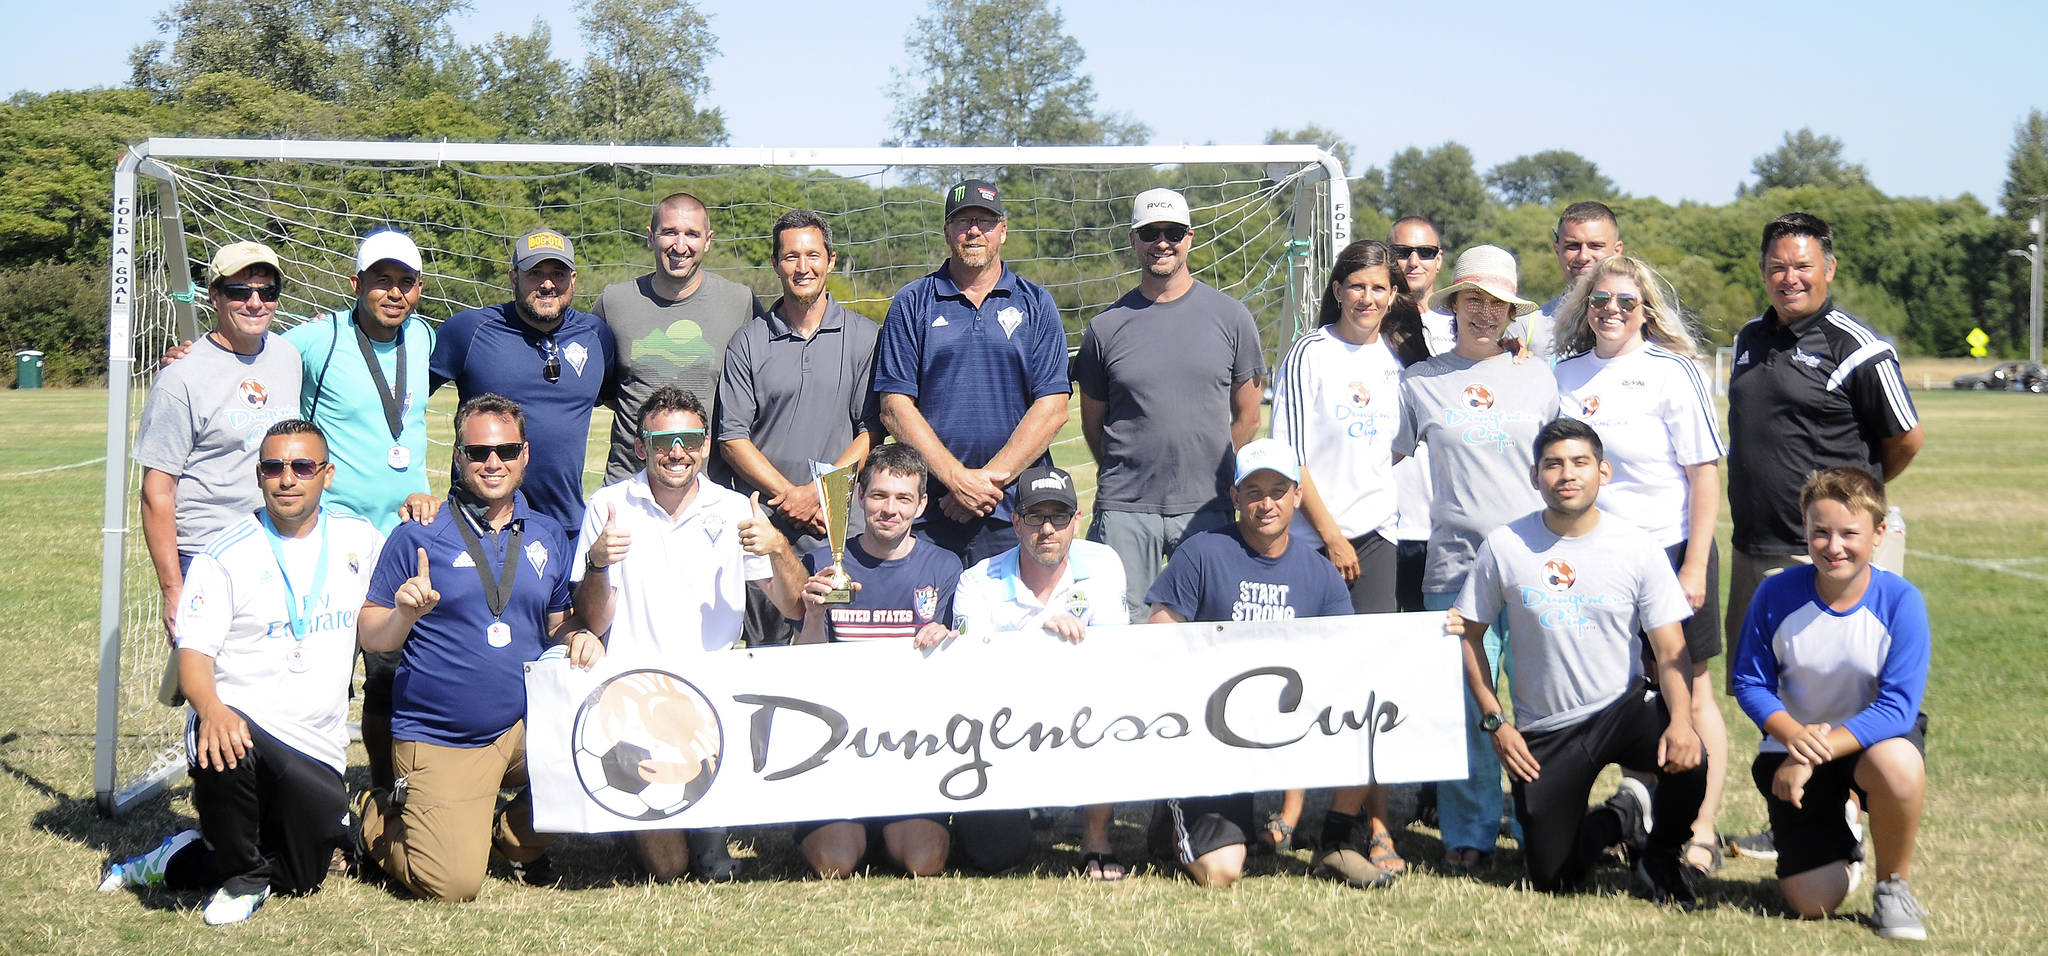 Organizers and coaches at the 2018 Dungeness Cup are all smiles following championship games that rounded out the three-day tournament on Aug. 5. Sequim Gazette photo by Michael Dashiell